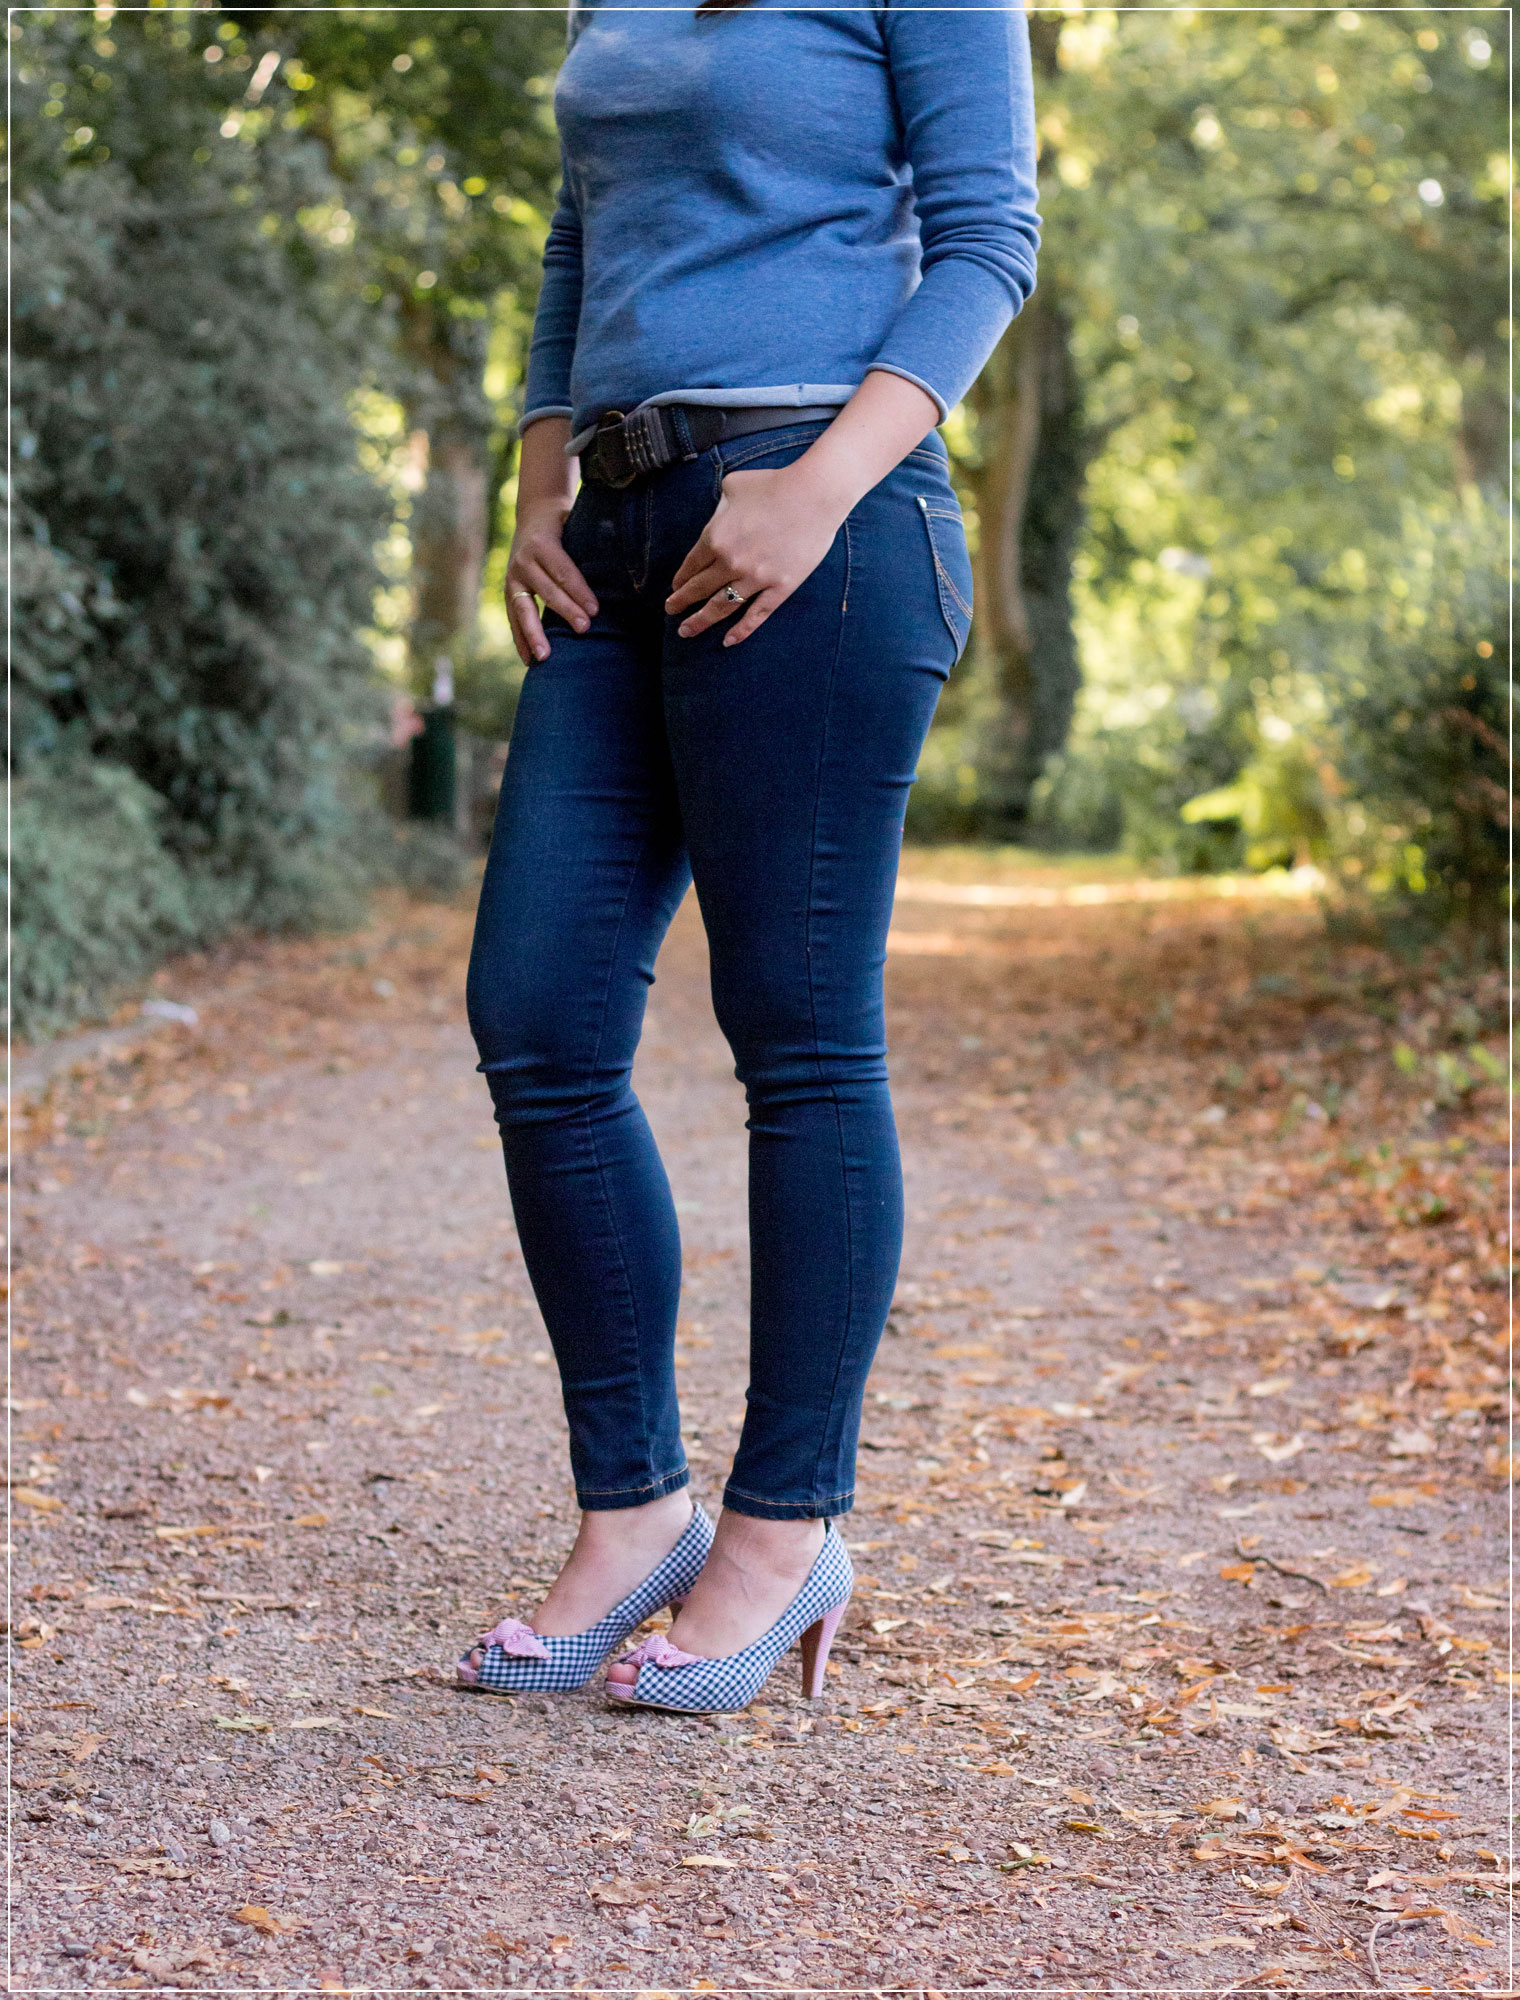 Herbstmode, Herbstoutfit, Jeans Fritz, Herbst Styles, Modeinspiration, Jeanslook, Denimstyle, Styleguide, Outfitinspiration, Modebloggerin, Fashionbloggerin, Modeblog, Ruhrgebiet